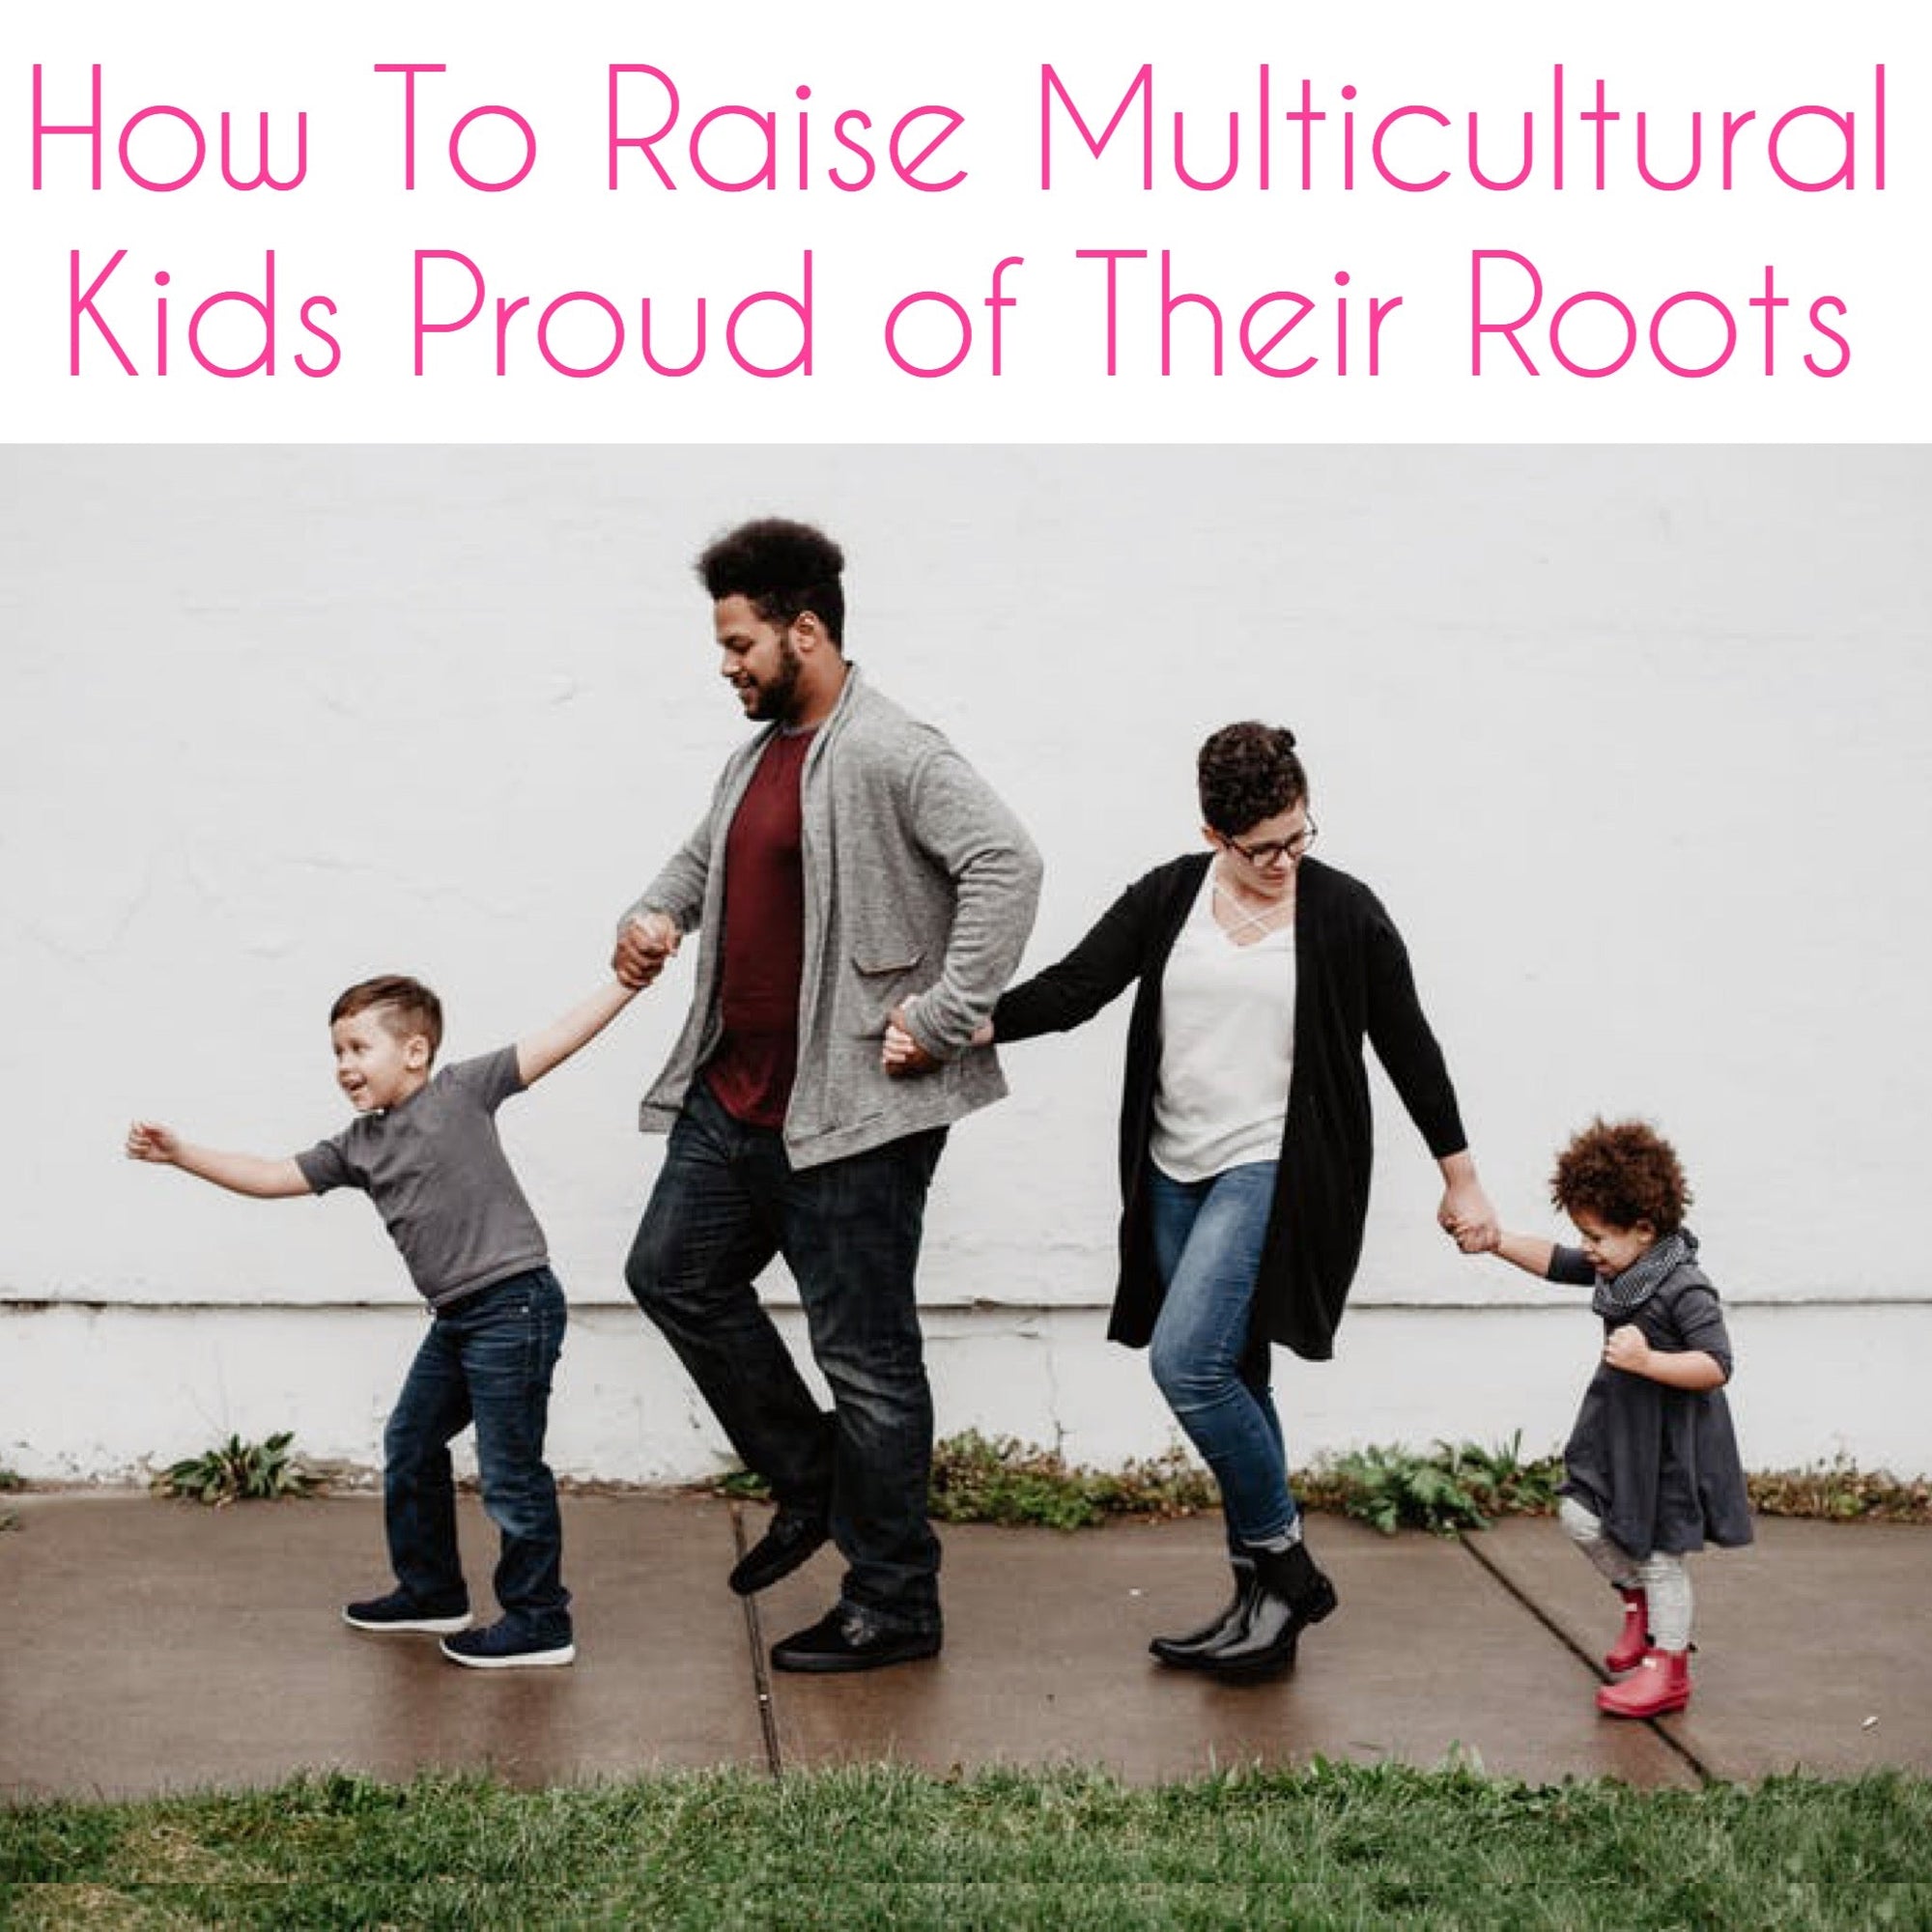 How to Raise Multicultural Kids Proud of Their Roots - Mi LegaSi